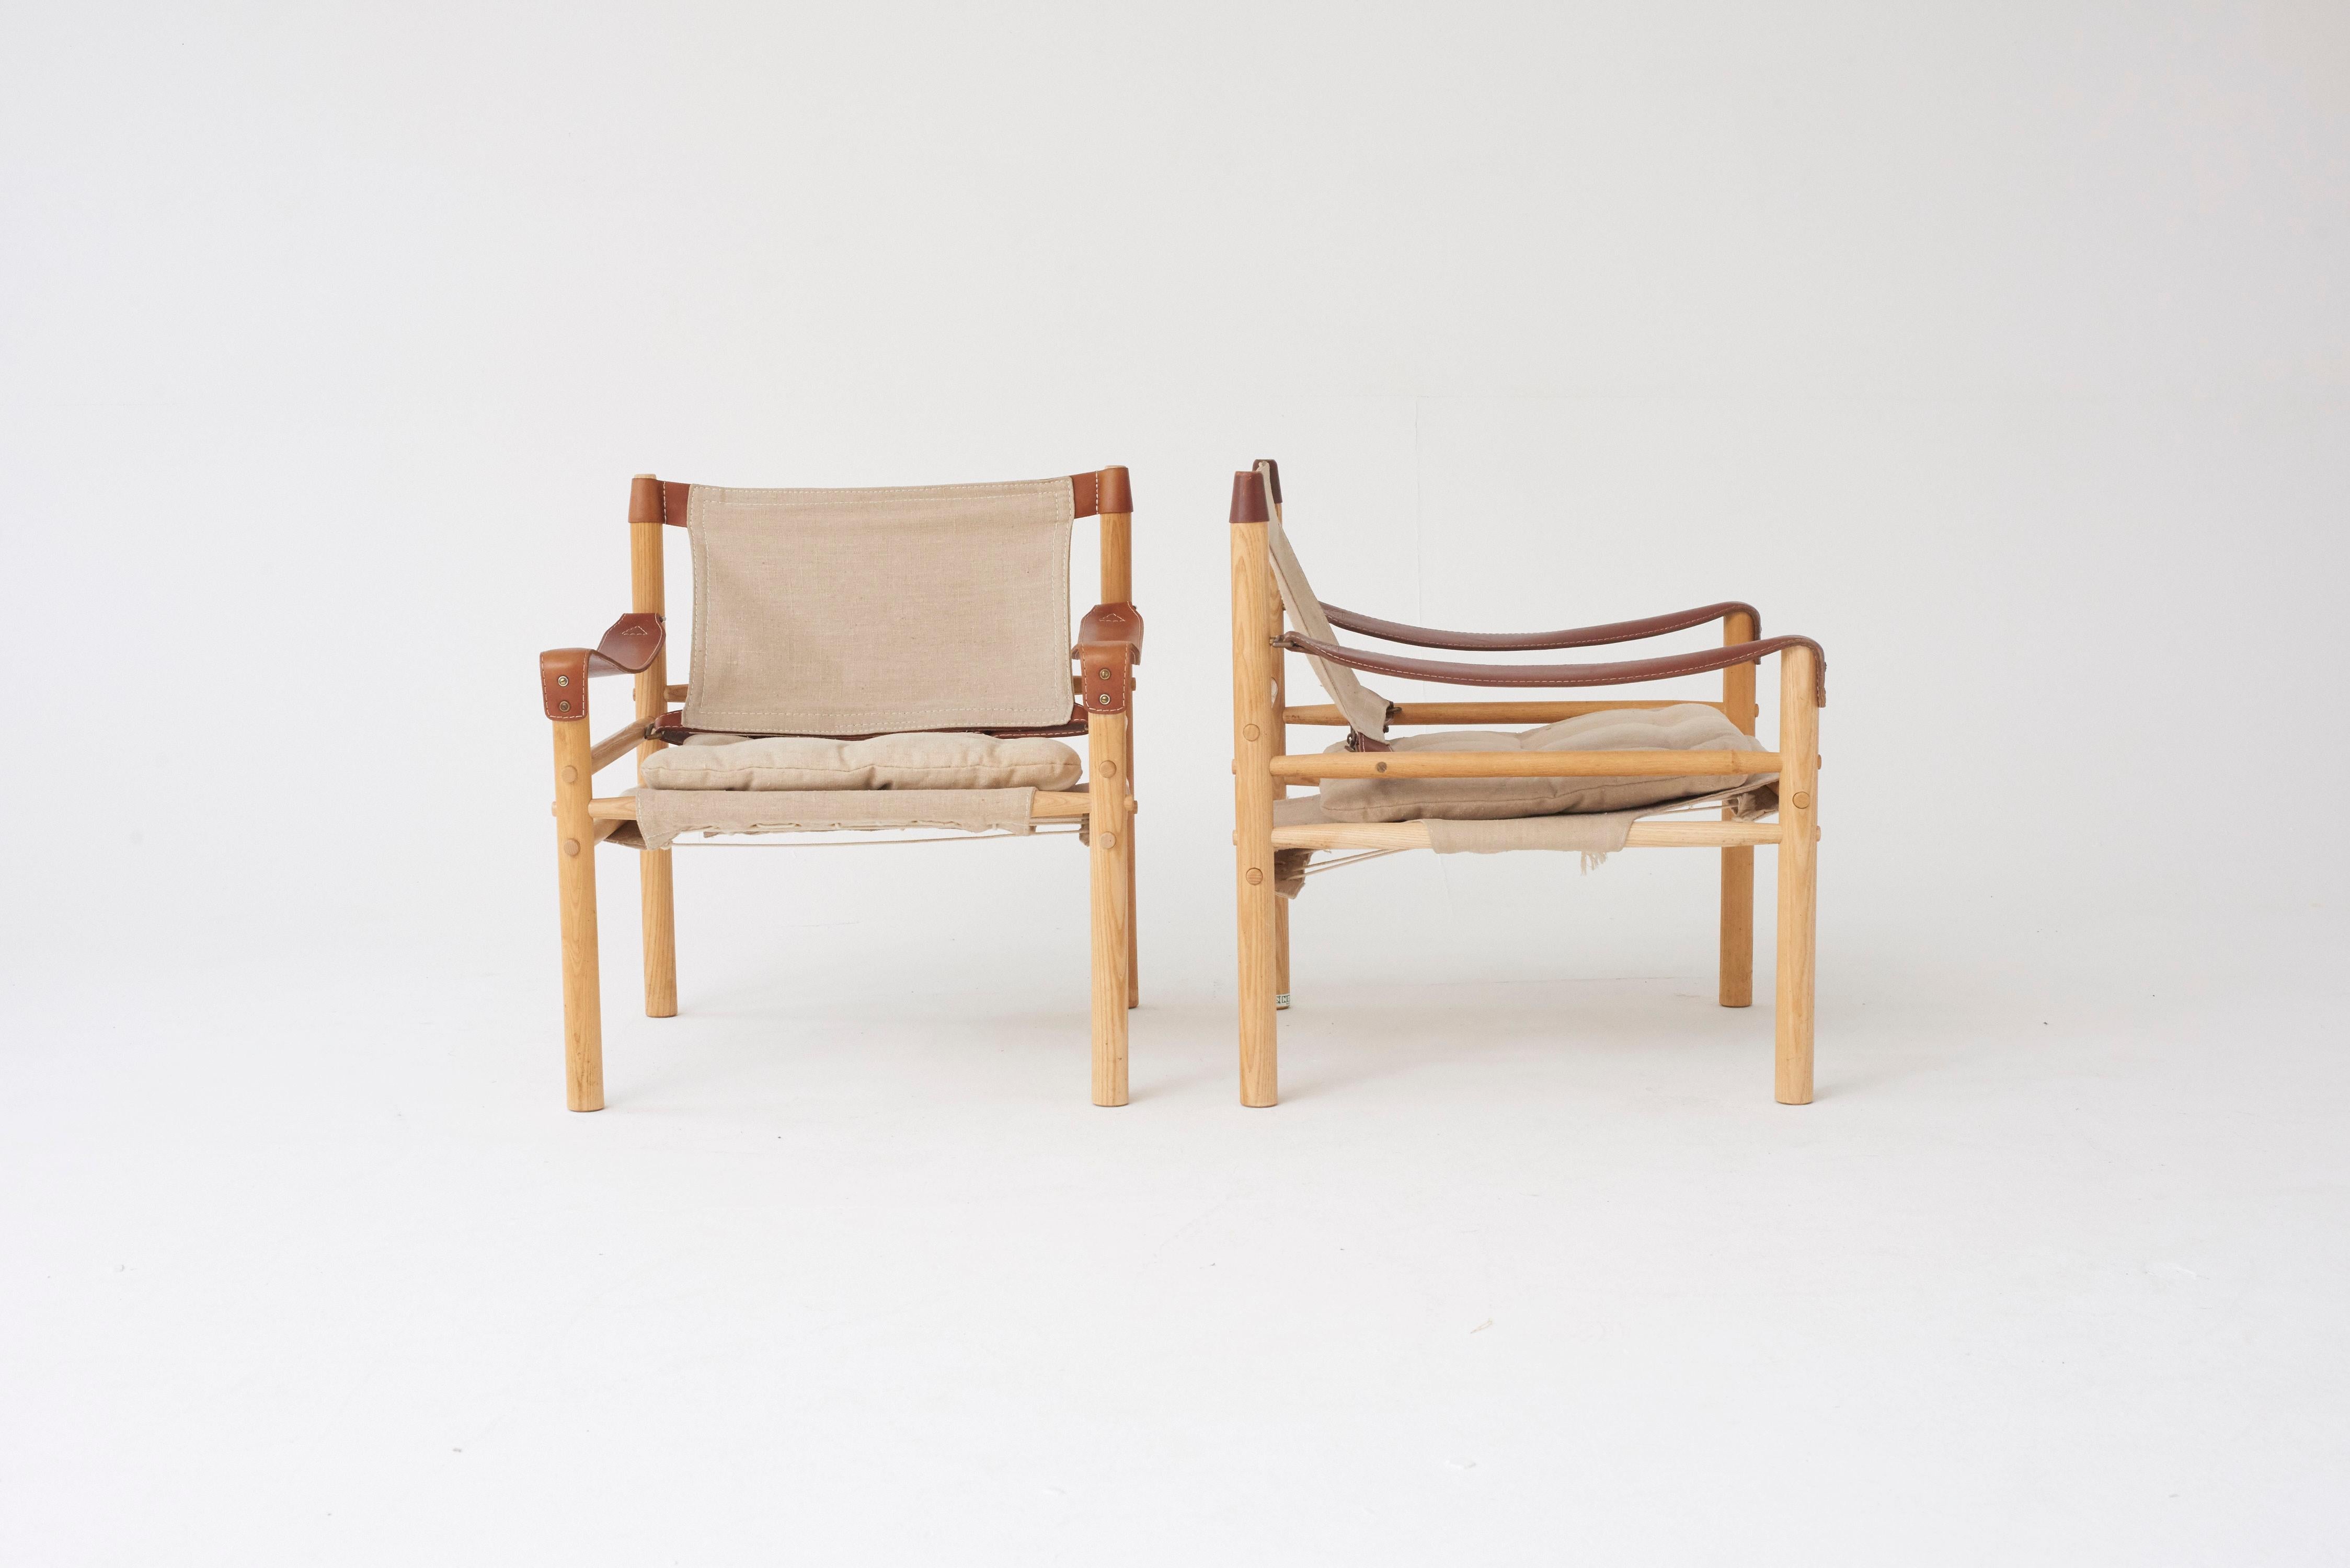 A pair of beautiful Arne Norell safari sirocco chairs in ashwood and canvas. Made by Norell Möbel AB, in Sweden with makers label intact. Very good vintage condition. Linen/canvas recently re-upholstered, slight variation in color tone between